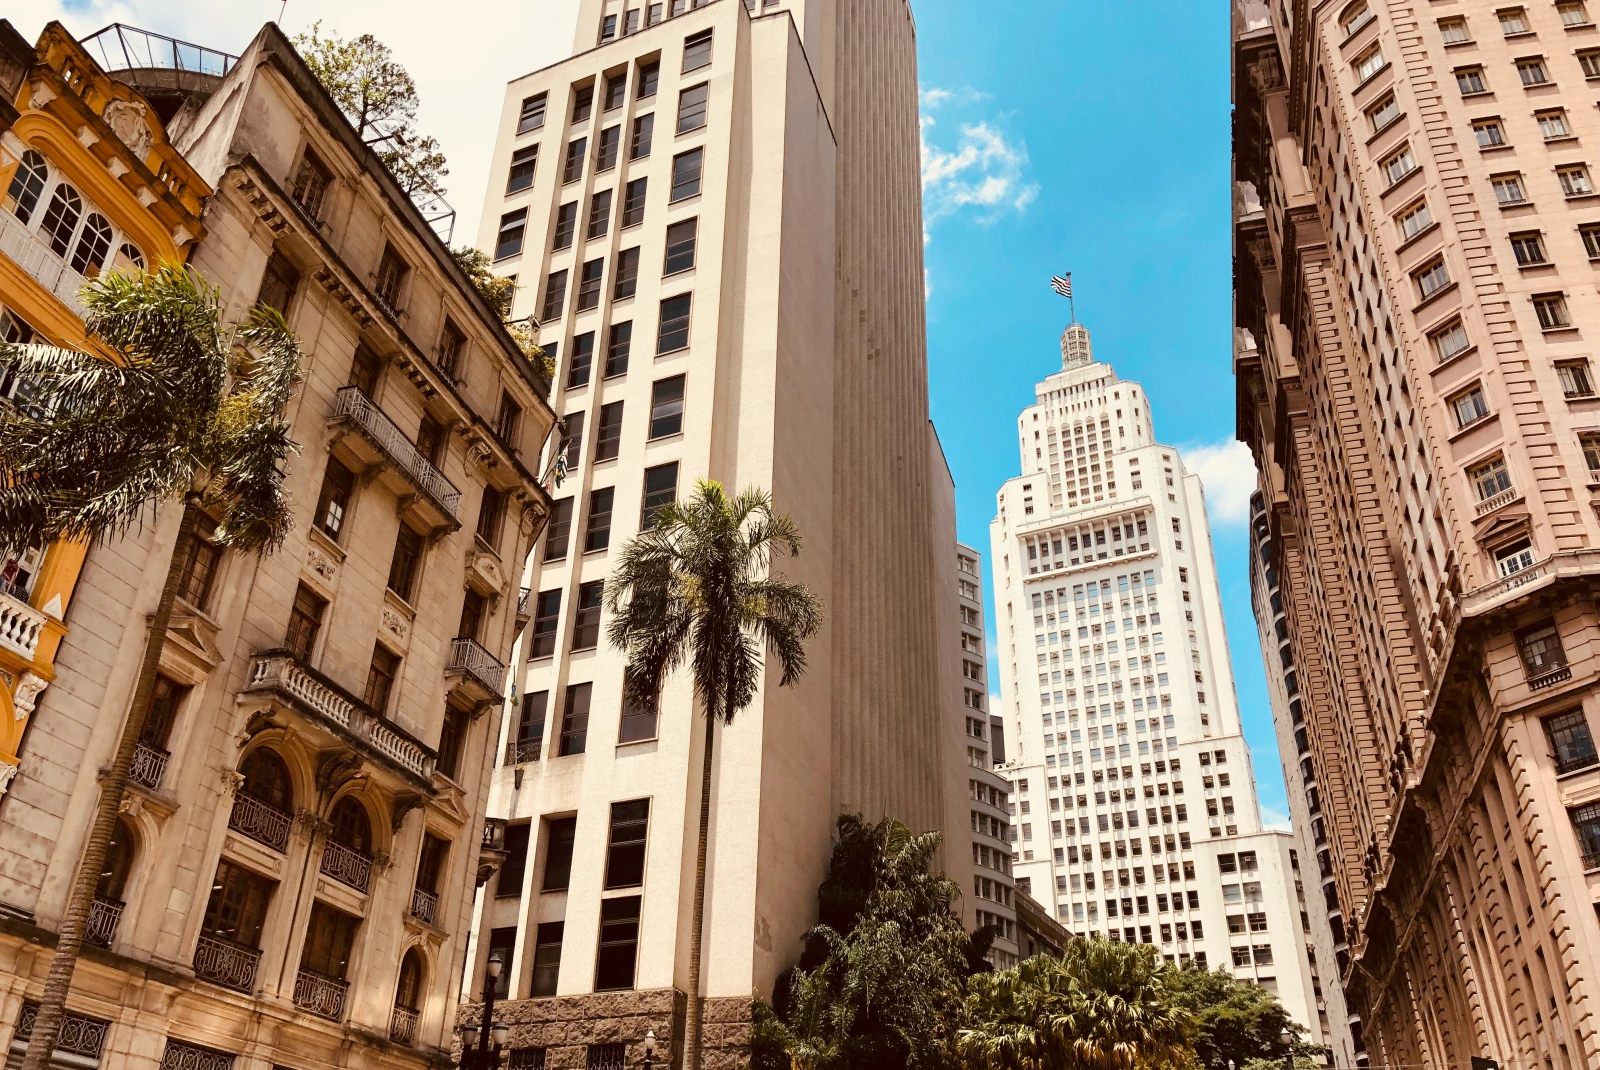 Tall white and brown buildings with green palm trees in São Paulo, Brazil.